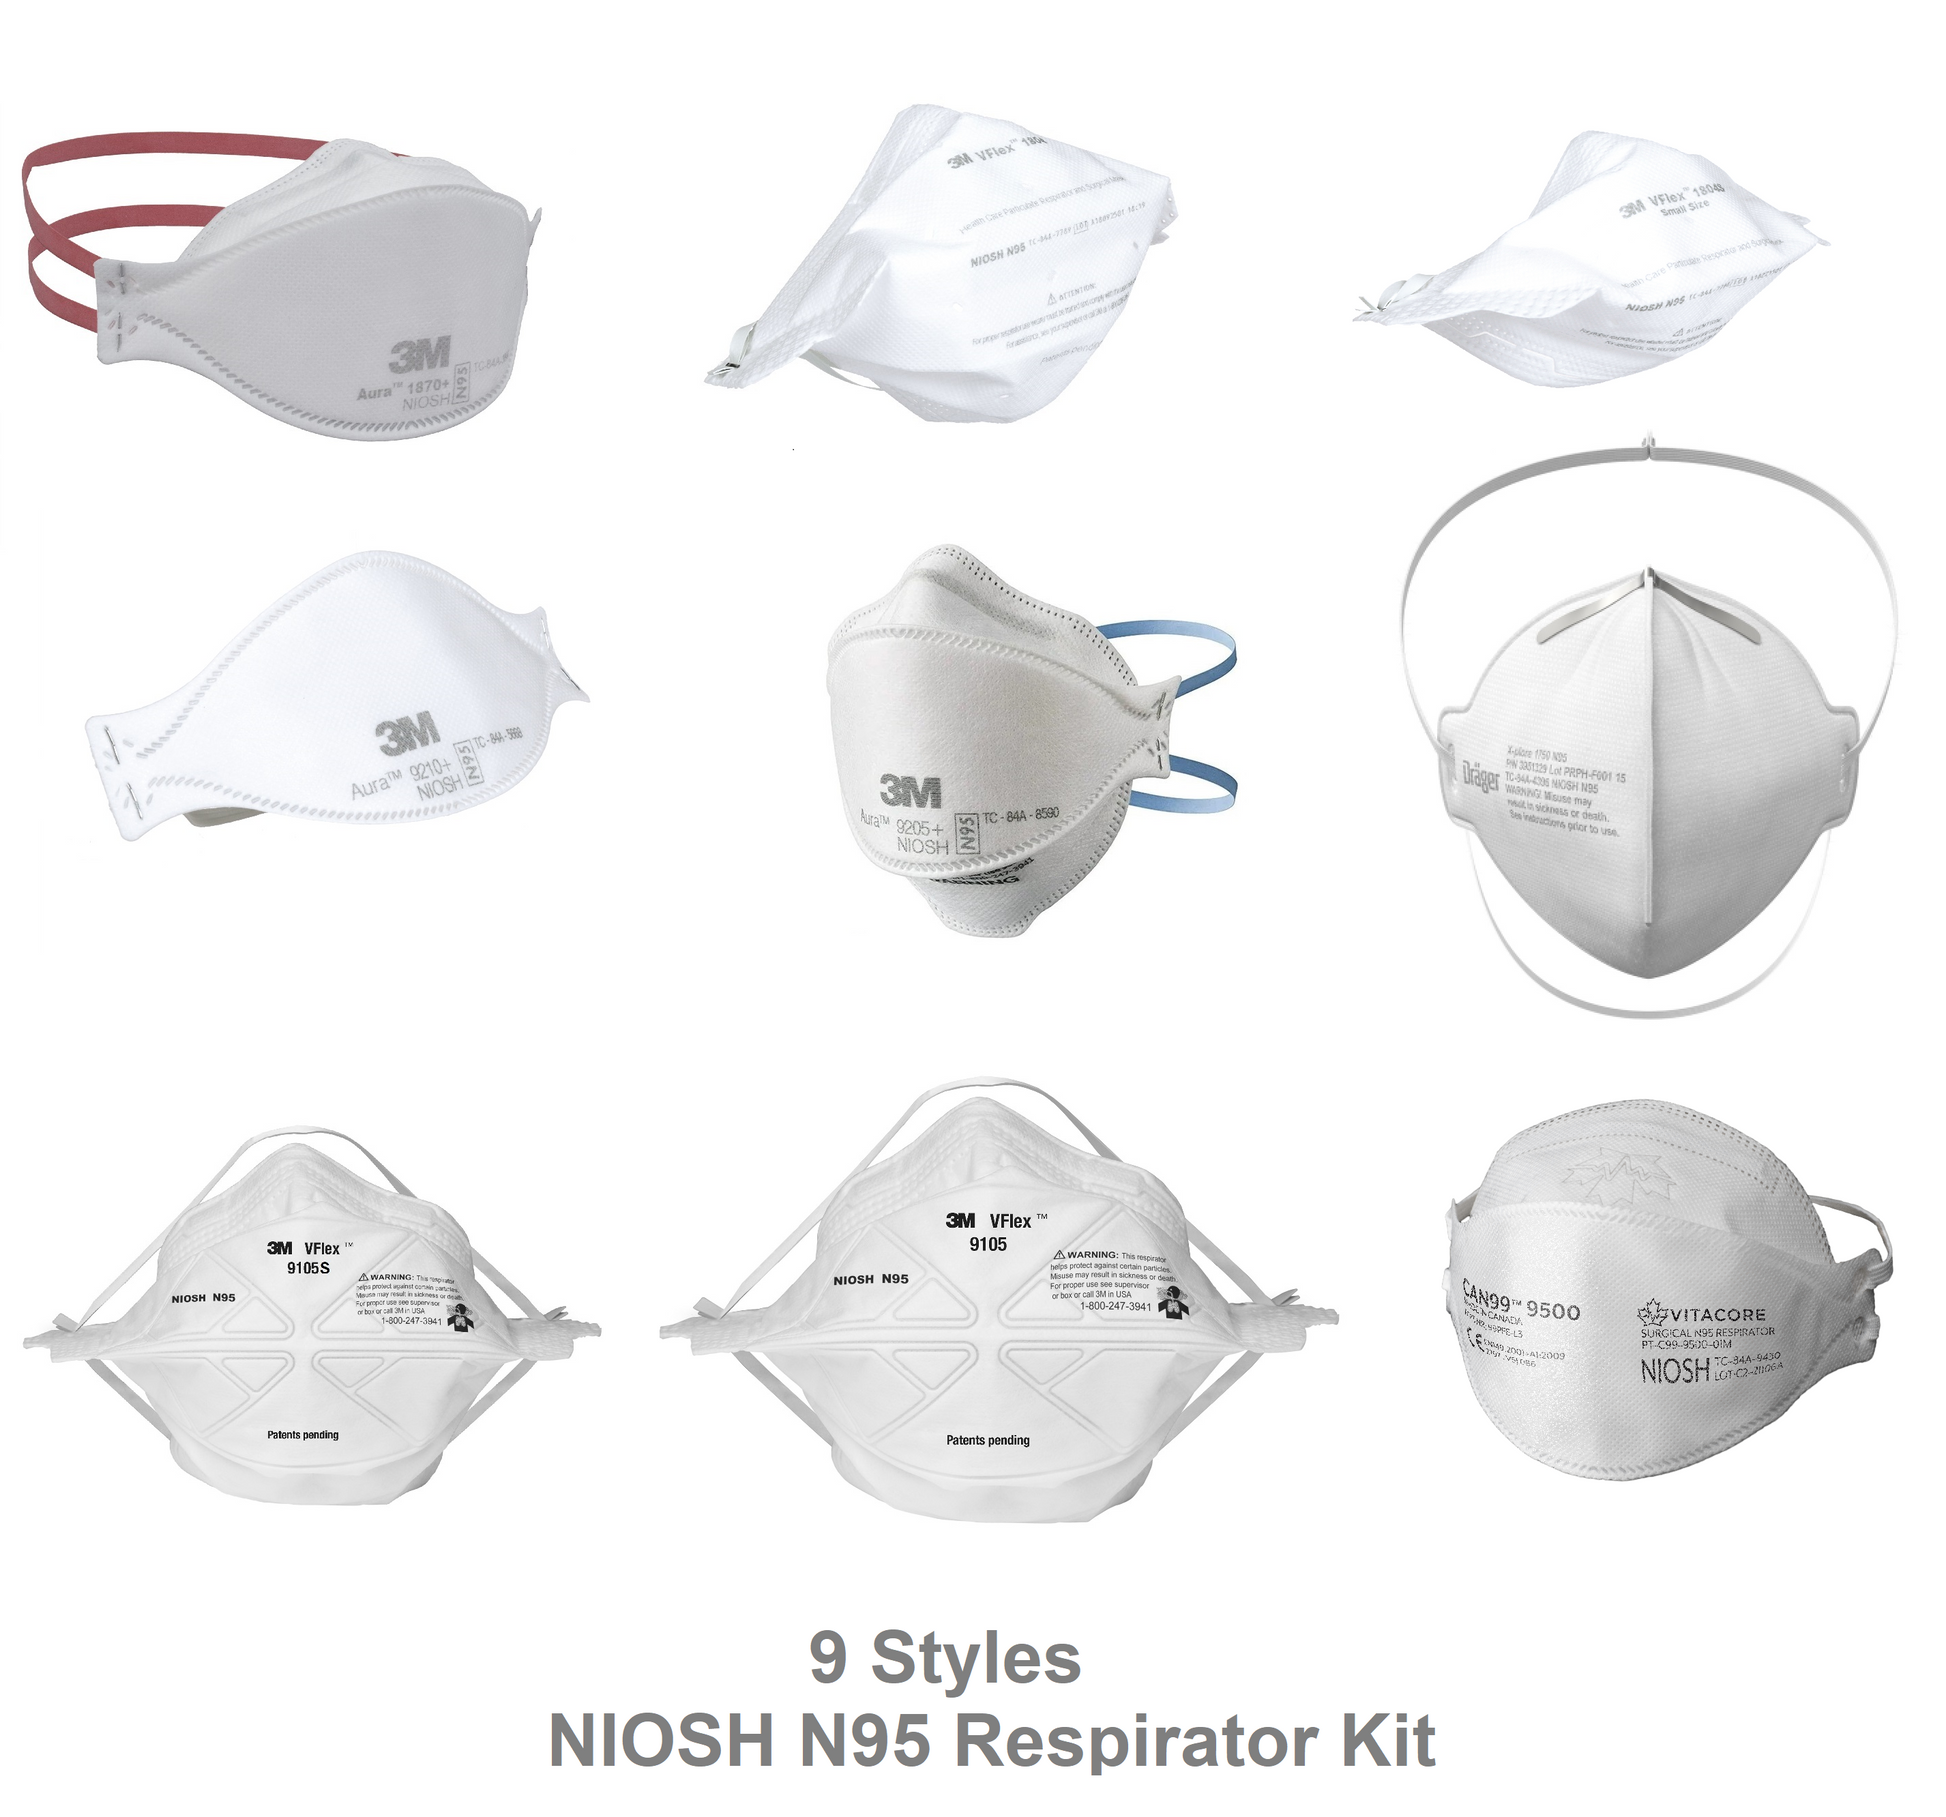 9-piece NIOSH N95 Sample Sizing Kit for Fit Testing - 3M Canada Aura, 3M Vflex, Vitacore CAN99 9500, Drager 1750